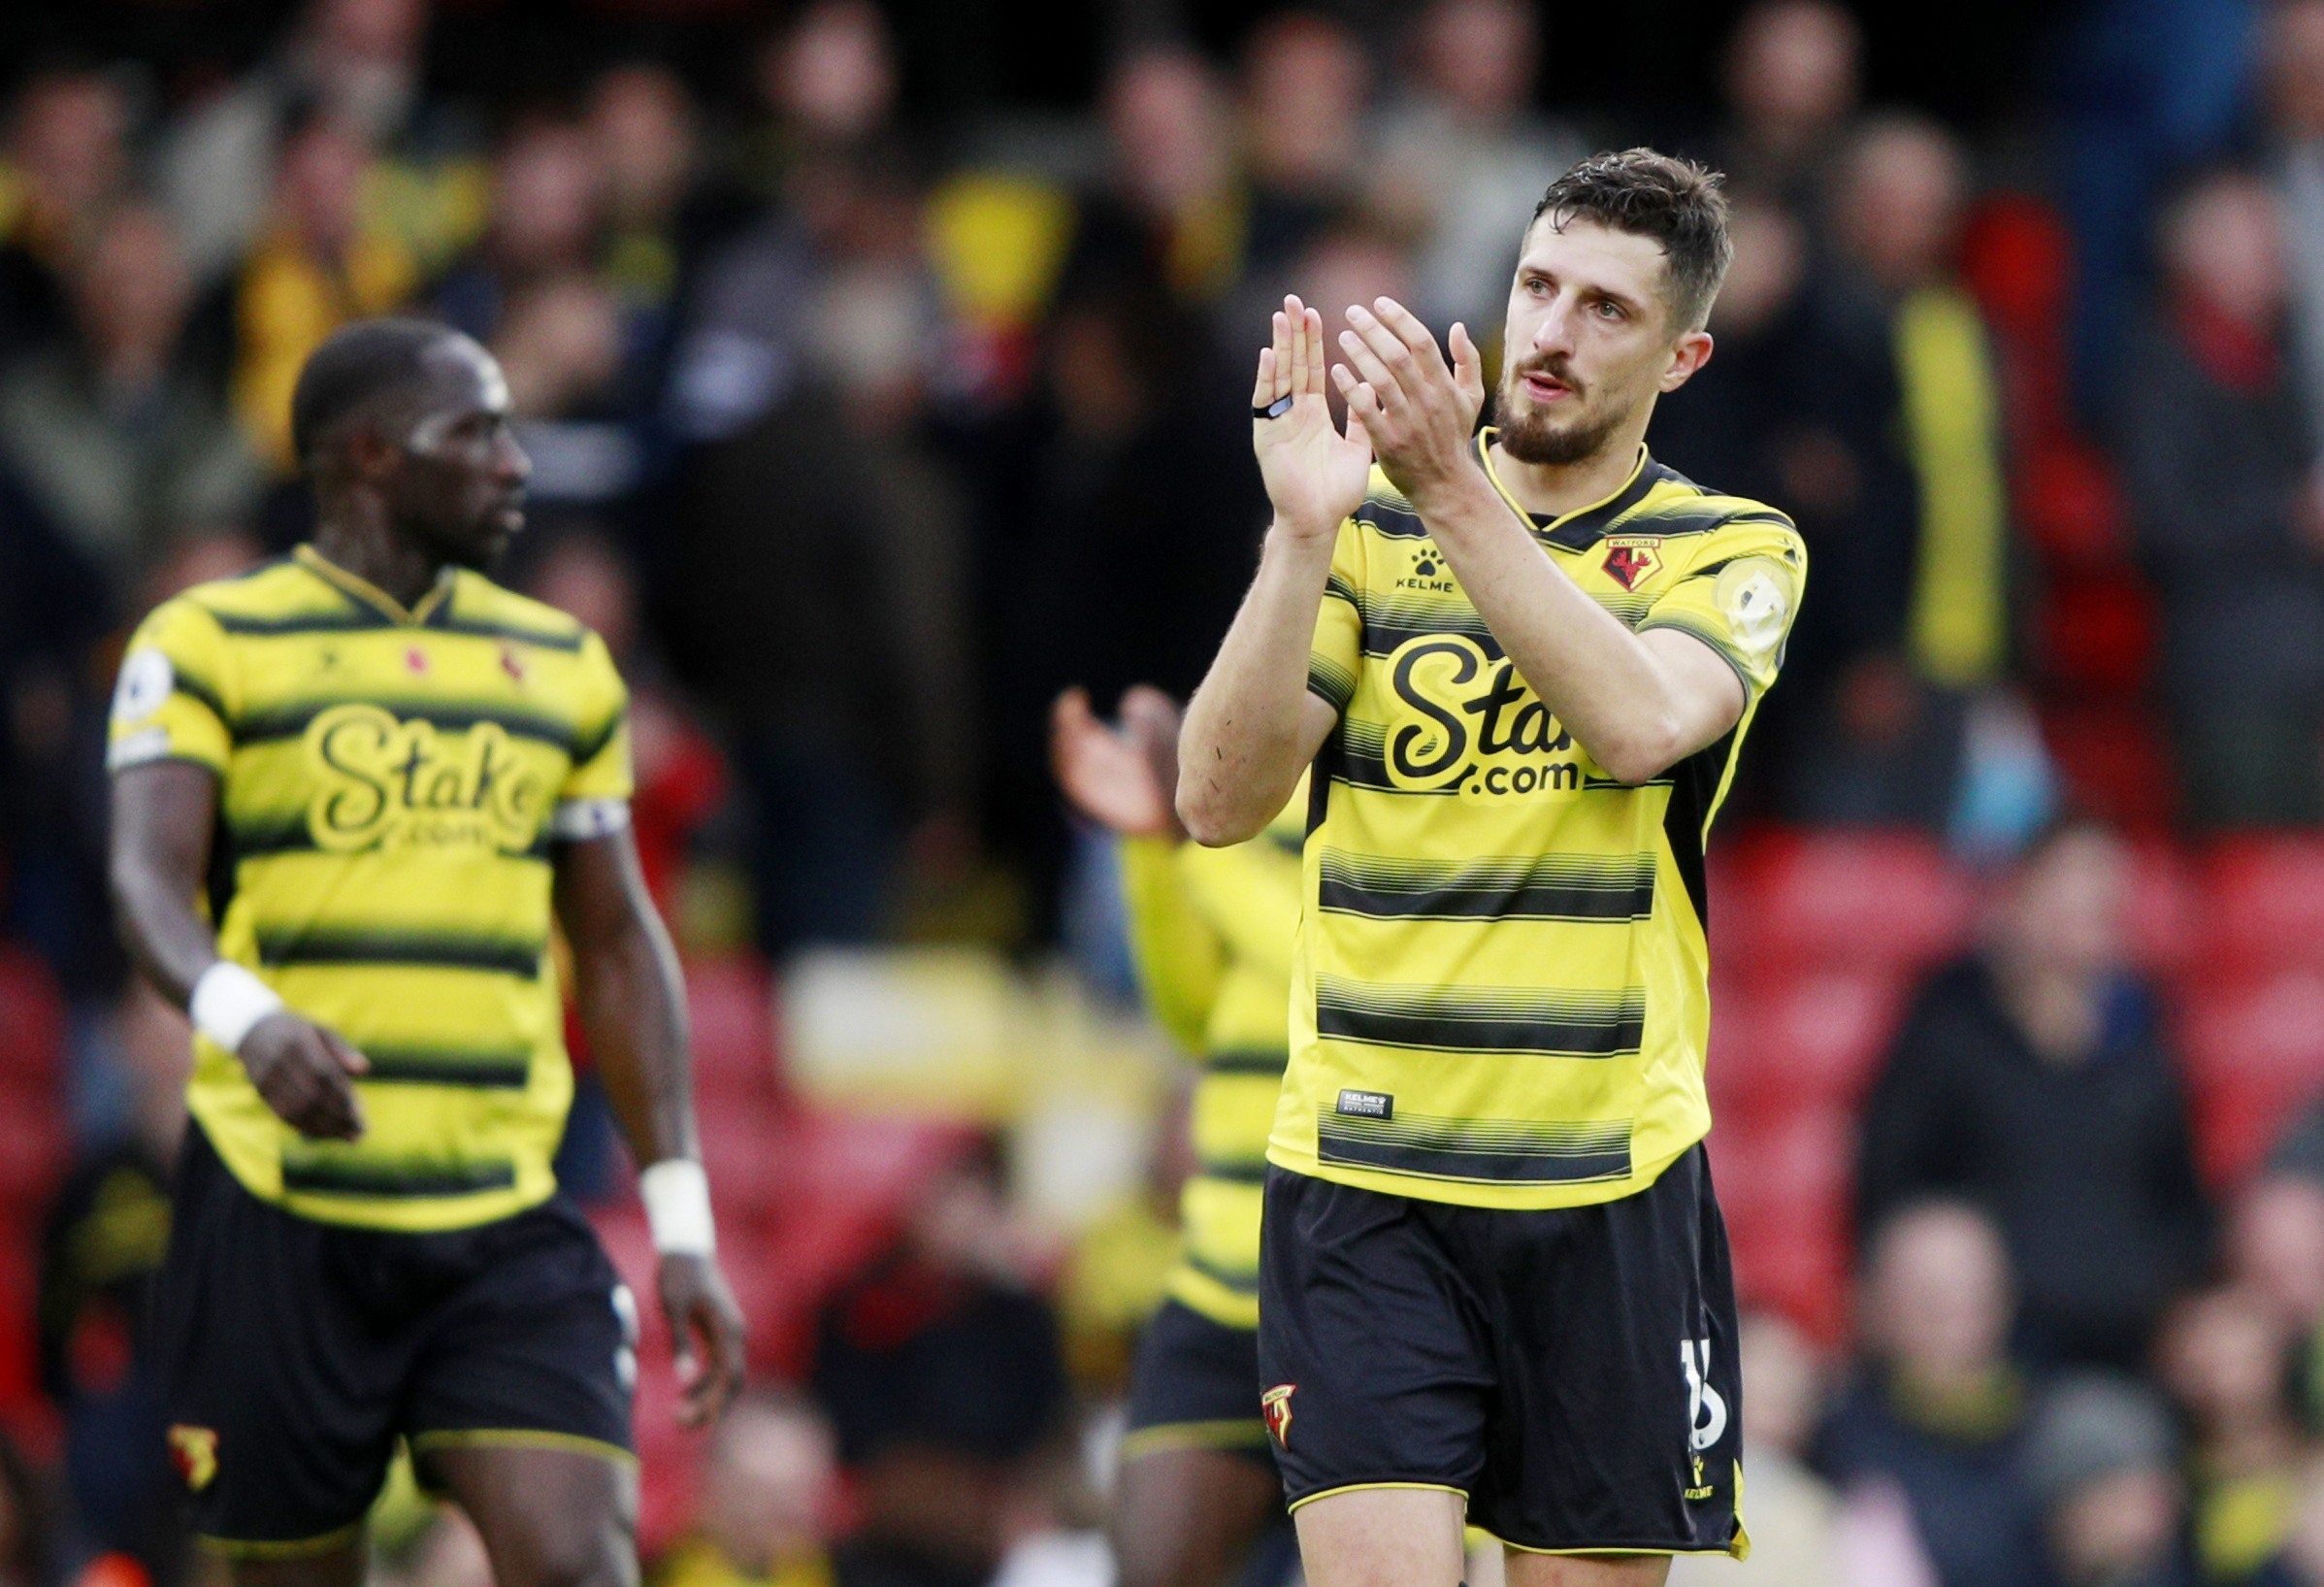 Watford players rated after Southampton defeat